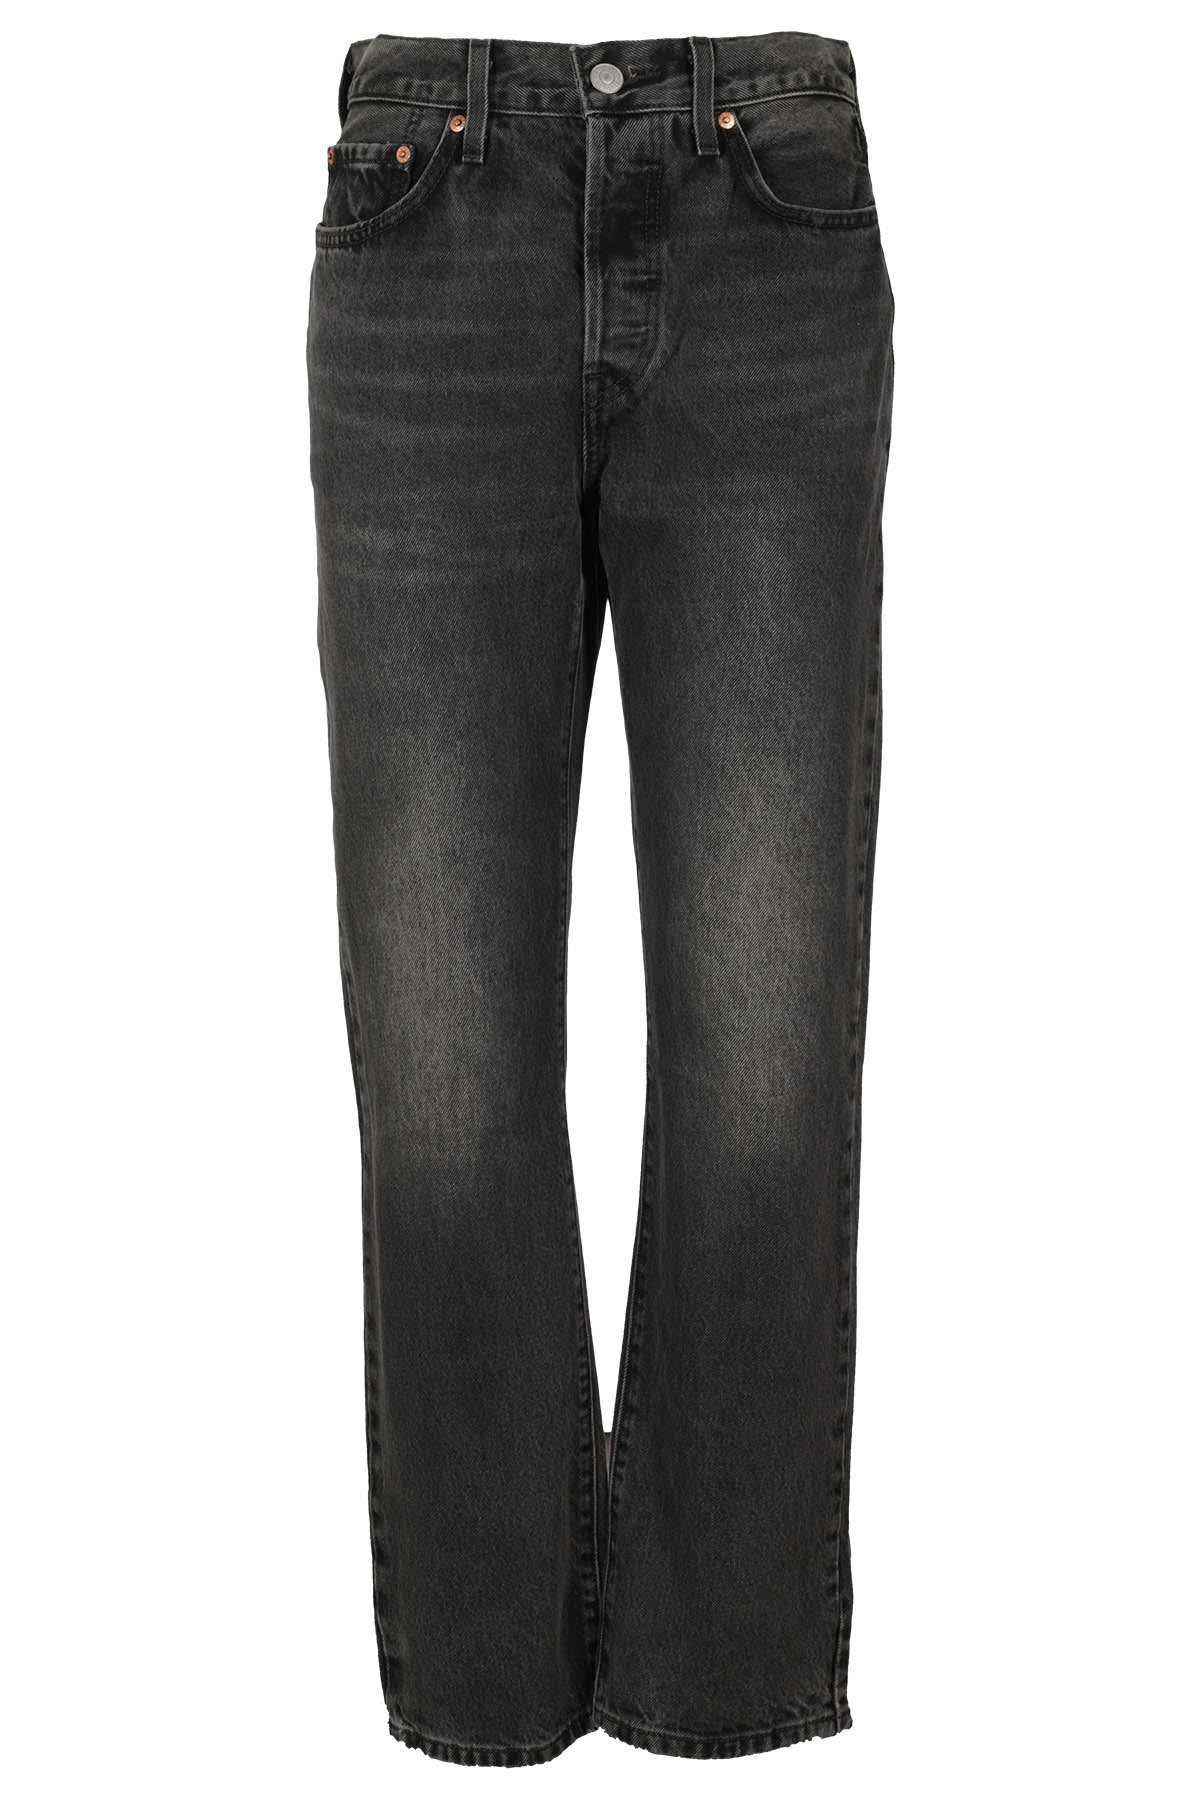 Shop Levi's 501 Jeans For Women Take A Hint In Black